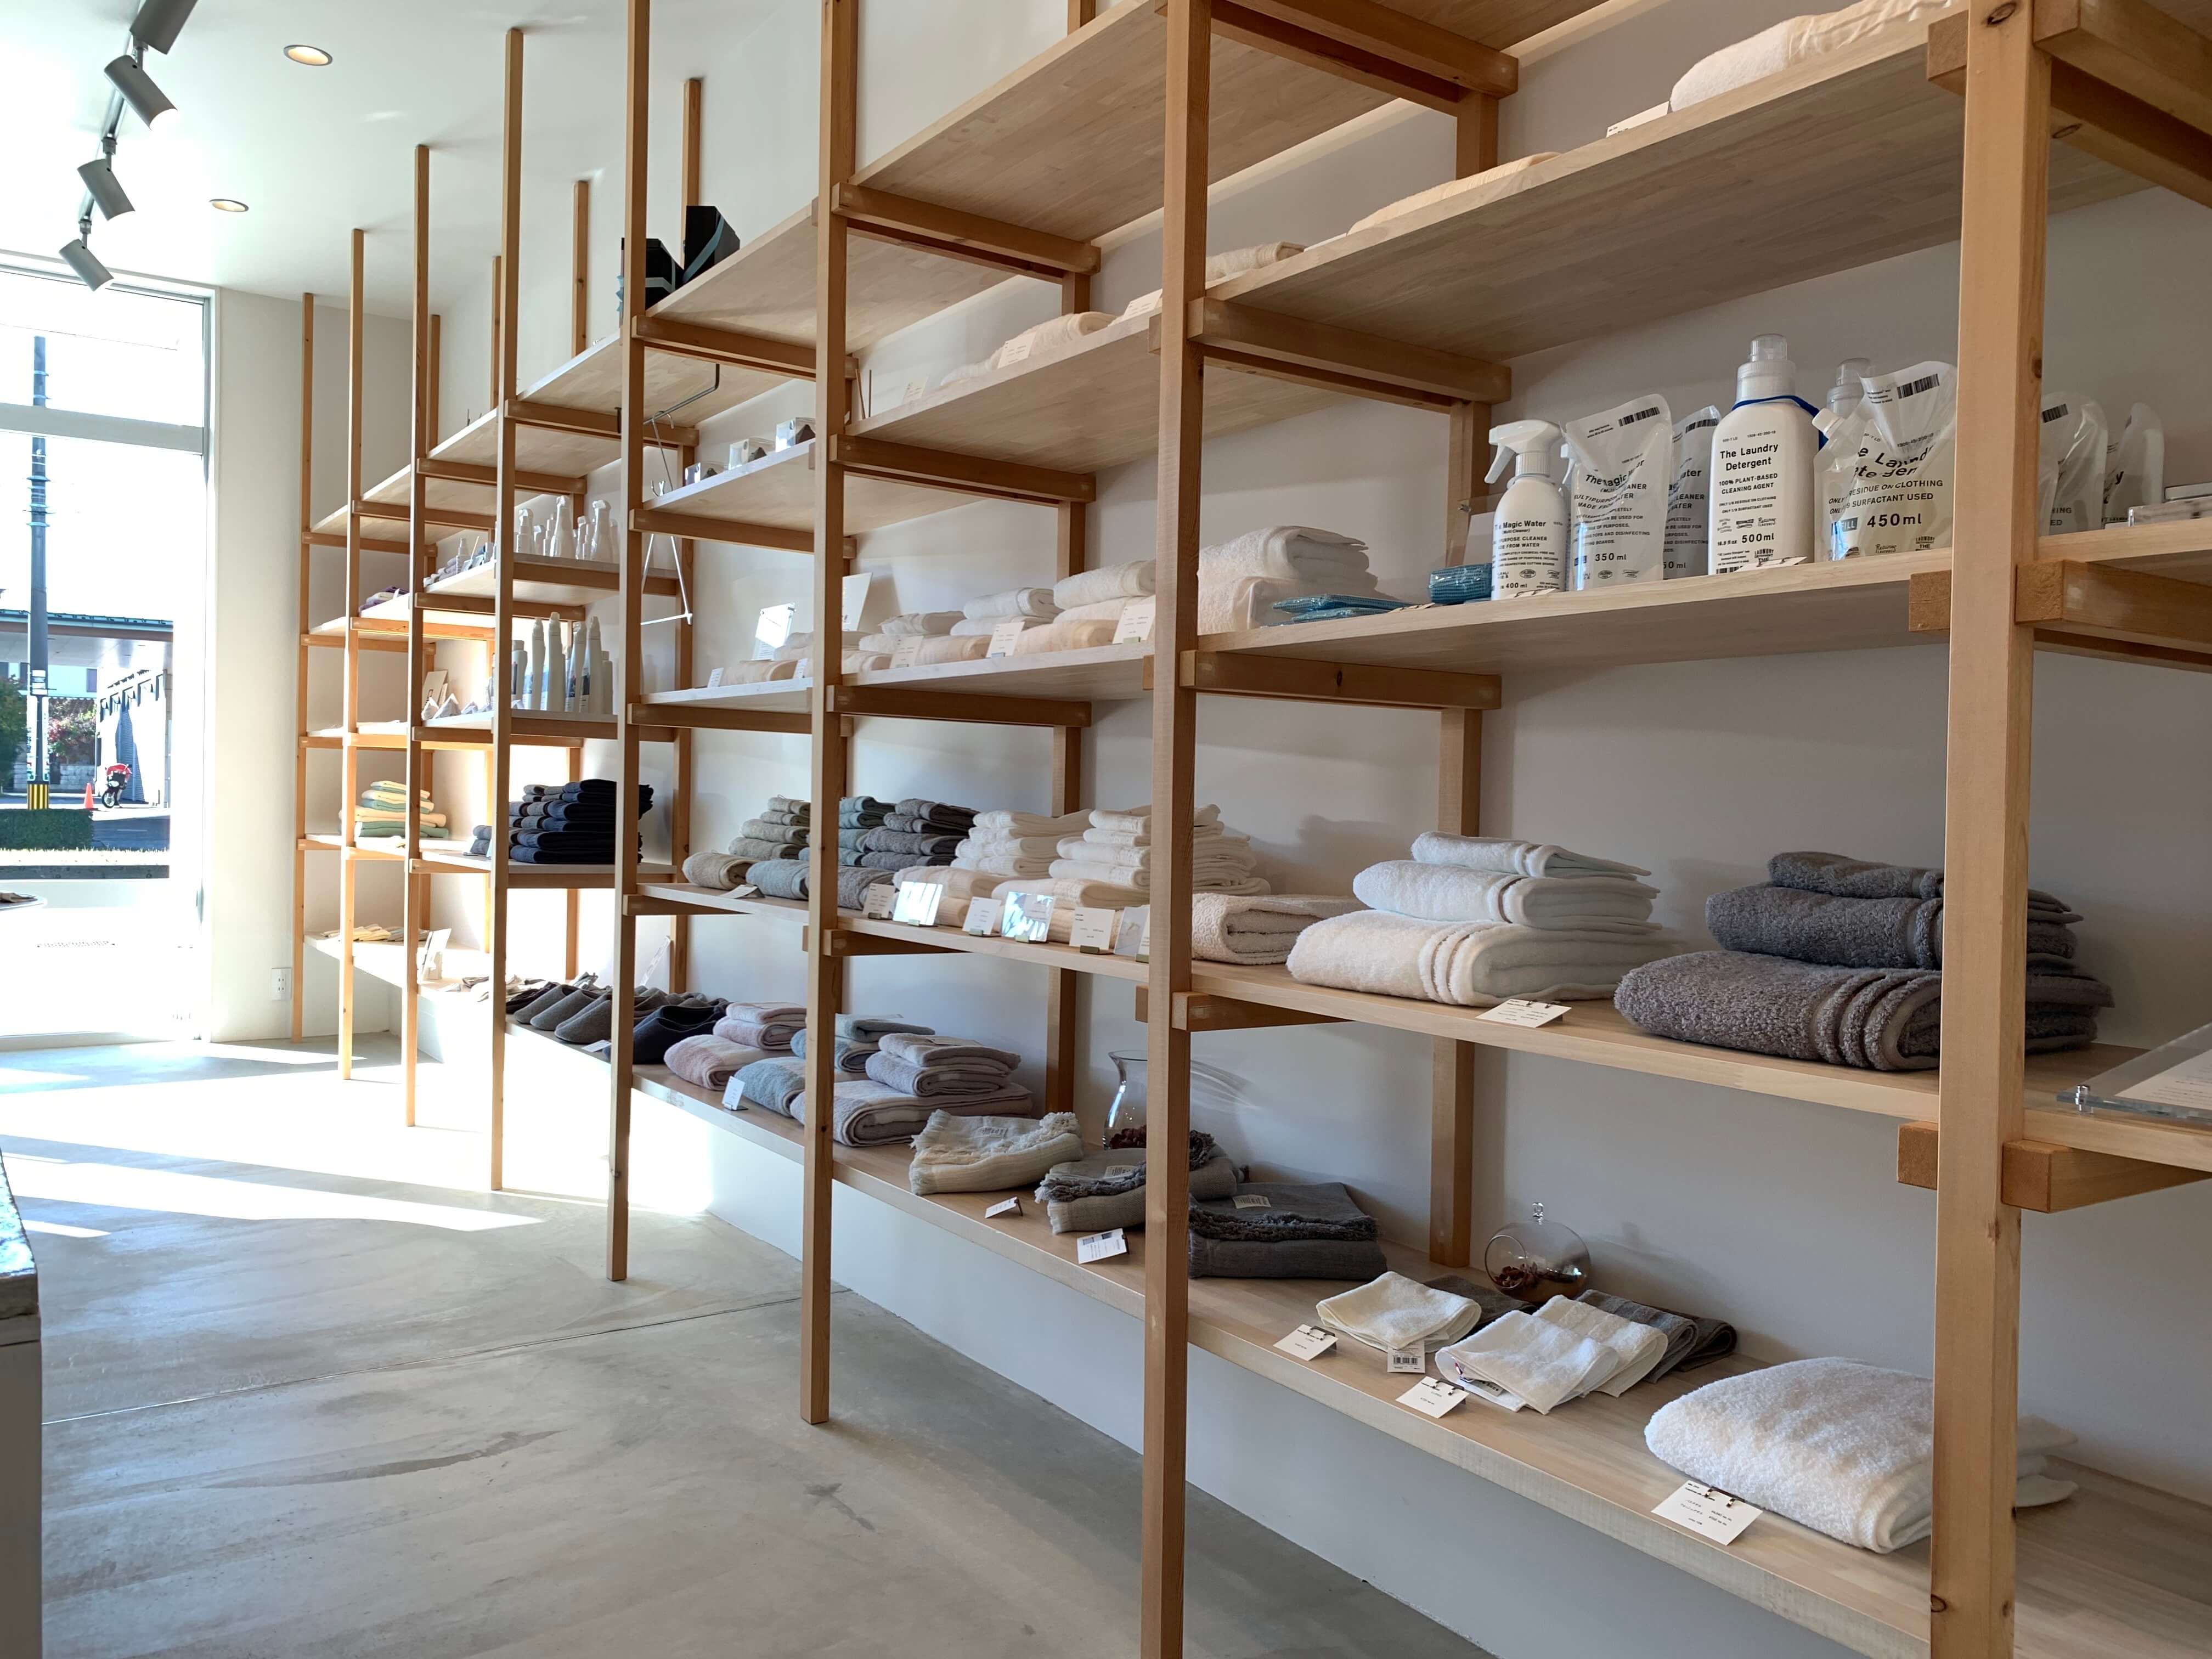 COMFY, a store for daily sundries and gifts